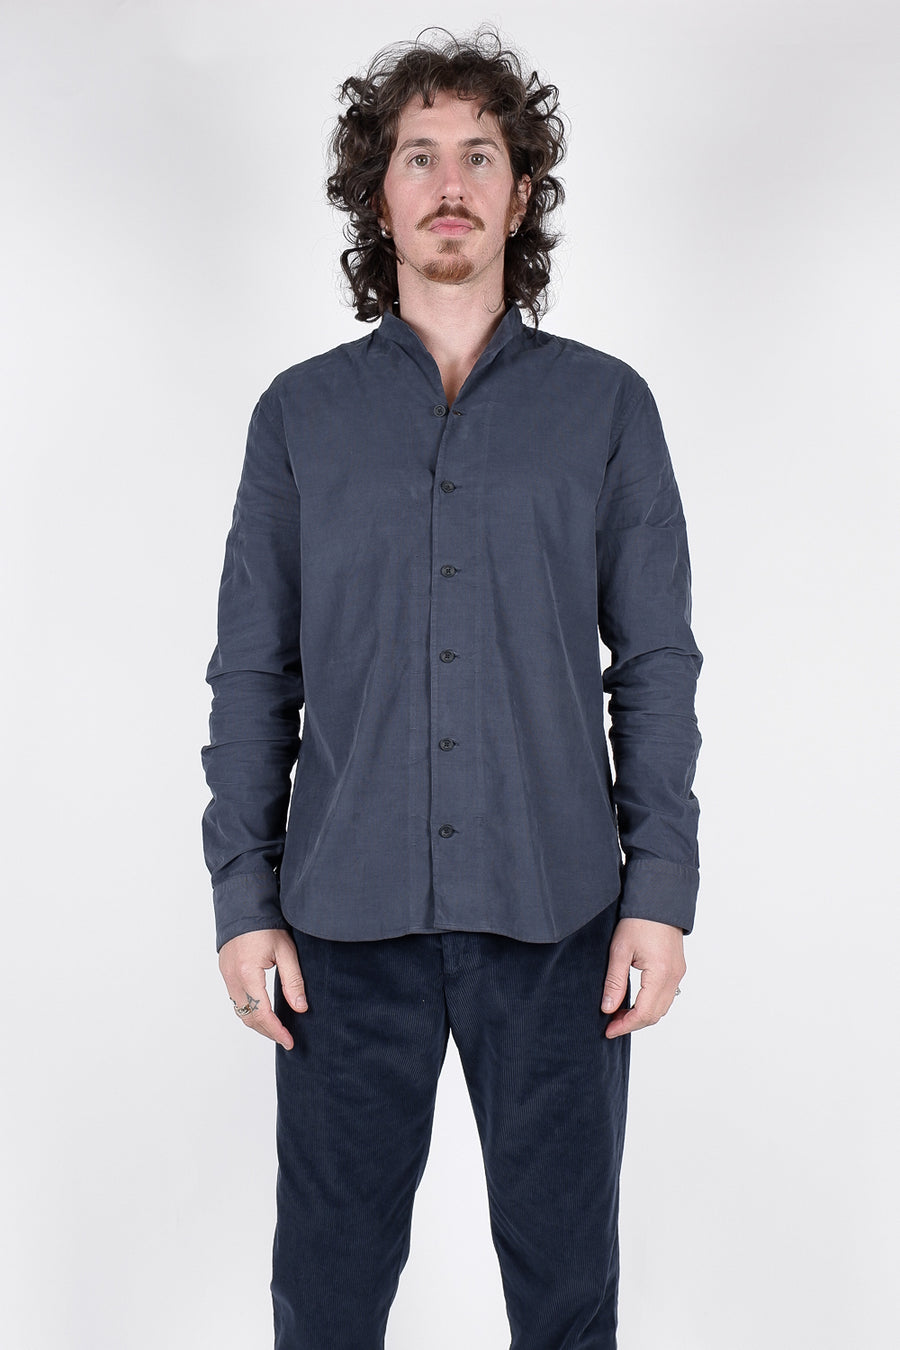 Buy the Hannes Roether Textured Cotton Shirt in Blue at Intro. Spend £50 for free UK delivery. Official stockists. We ship worldwide.